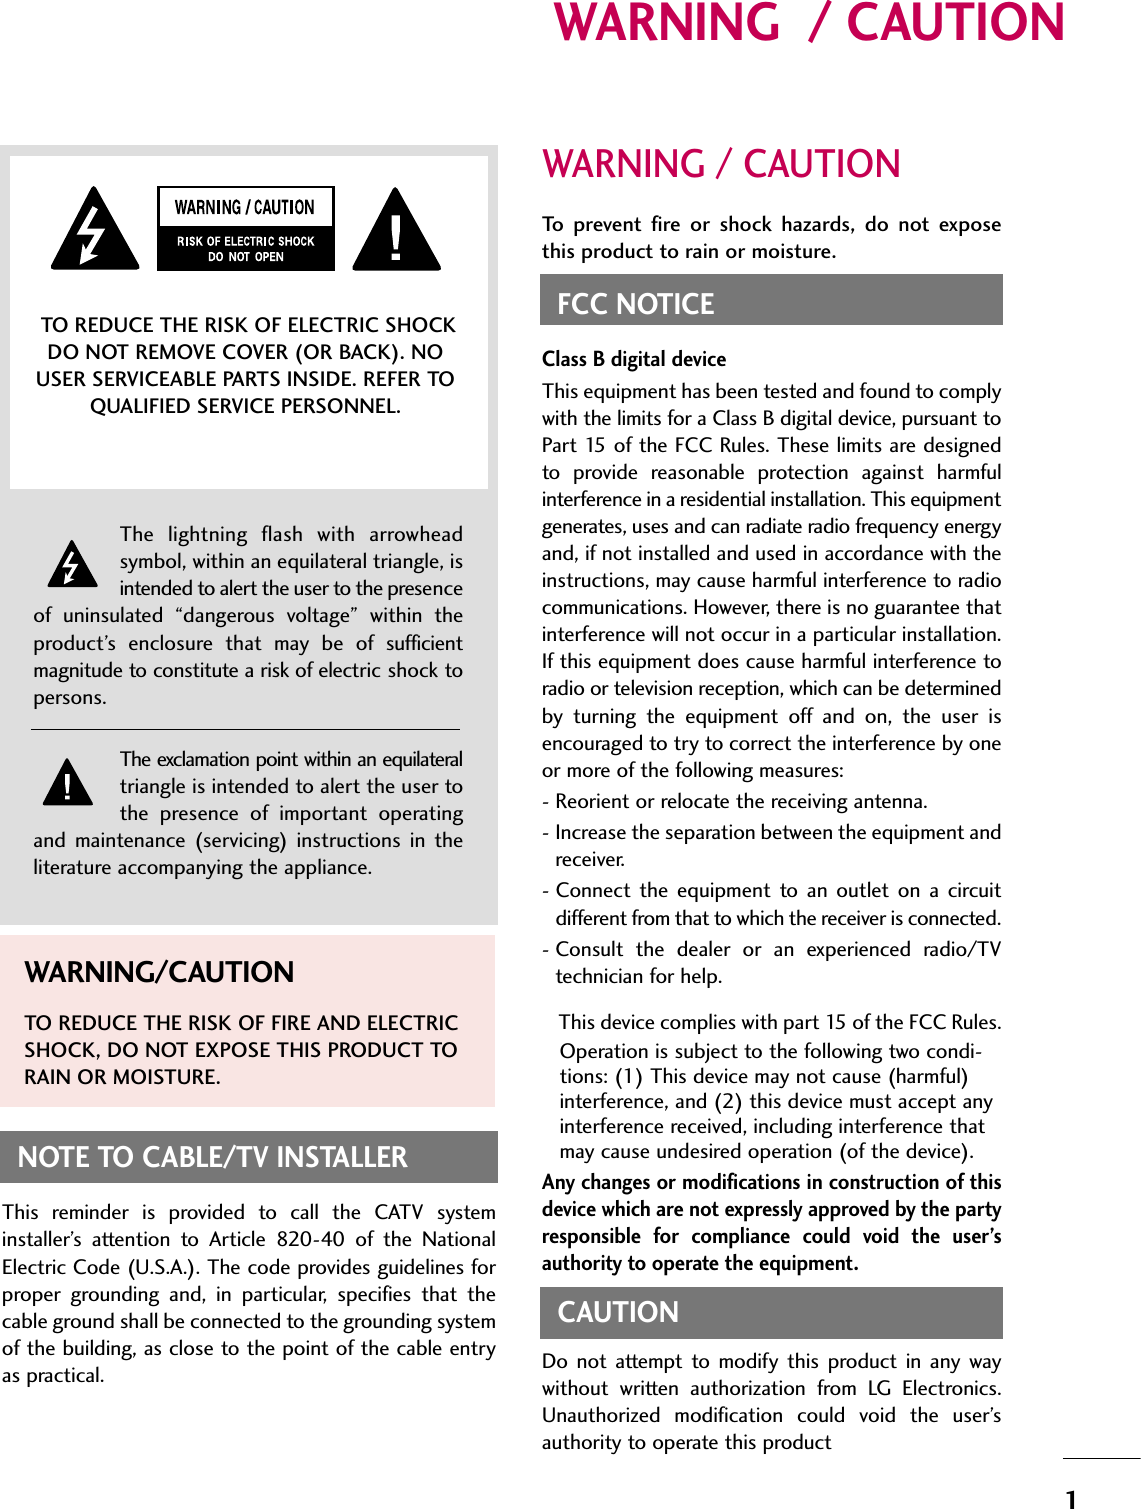 1WARNING  / CAUTIONWARNING / CAUTIONTo  prevent  fire  or  shock  hazards,  do  not  exposethis product to rain or moisture.FCC NOTICEClass B digital deviceThis equipment has been tested and found to complywith the limits for a Class B digital device, pursuant toPart  15 of the FCC Rules.  These limits are designedto  provide  reasonable  protection  against  harmfulinterference in a residential installation. This equipmentgenerates, uses and can radiate radio frequency energyand, if not installed and used in accordance with theinstructions, may cause harmful interference to radiocommunications. However, there is no guarantee thatinterference will not occur in a particular installation.If this equipment does cause harmful interference toradio or television reception, which can be determinedby  turning  the  equipment  off  and  on,  the  user  isencouraged to try to correct the interference by oneor more of the following measures:- Reorient or relocate the receiving antenna.- Increase the separation between the equipment andreceiver.- Connect  the  equipment  to  an  outlet  on  a  circuitdifferent from that to which the receiver is connected.- Consult  the  dealer  or  an  experienced  radio/TVtechnician for help.This device complies with part 15 of the FCC Rules.Operation is subject to the following two condi-tions: (1) This device may not cause (harmful)interference, and (2) this device must accept anyinterference received, including interference thatmay cause undesired operation (of the device).Any changes or modifications in construction of thisdevice which are not expressly approved by the partyresponsible  for  compliance  could  void  the  user’sauthority to operate the equipment.CAUTIONDo  not  attempt  to  modify  this  product  in  any  waywithout  written  authorization  from  LG  Electronics.Unauthorized  modification  could  void  the  user’sauthority to operate this product The  lightning  flash  with  arrowheadsymbol, within an equilateral triangle, isintended to alert the user to the presenceof  uninsulated  “dangerous  voltage”  within  theproduct’s  enclosure  that  may  be  of  sufficientmagnitude to constitute a risk of electric shock topersons.The exclamation point within an equilateraltriangle is intended to alert the user tothe  presence  of  important  operatingand  maintenance  (servicing)  instructions  in  theliterature accompanying the appliance.TO REDUCE THE RISK OF ELECTRIC SHOCKDO NOT REMOVE COVER (OR BACK). NOUSER SERVICEABLE PARTS INSIDE. REFER TOQUALIFIED SERVICE PERSONNEL.WARNING/CAUTIONTO REDUCE THE RISK OF FIRE AND ELECTRICSHOCK, DO NOT EXPOSE THIS PRODUCT TORAIN OR MOISTURE.NOTE TO CABLE/TV INSTALLERThis  reminder  is  provided  to  call  the  CATV  systeminstaller’s  attention  to  Article  820-40  of  the  NationalElectric Code (U.S.A.). The code provides guidelines forproper  grounding  and,  in  particular,  specifies  that  thecable ground shall be connected to the grounding systemof the building, as close to the point of the cable entryas practical.